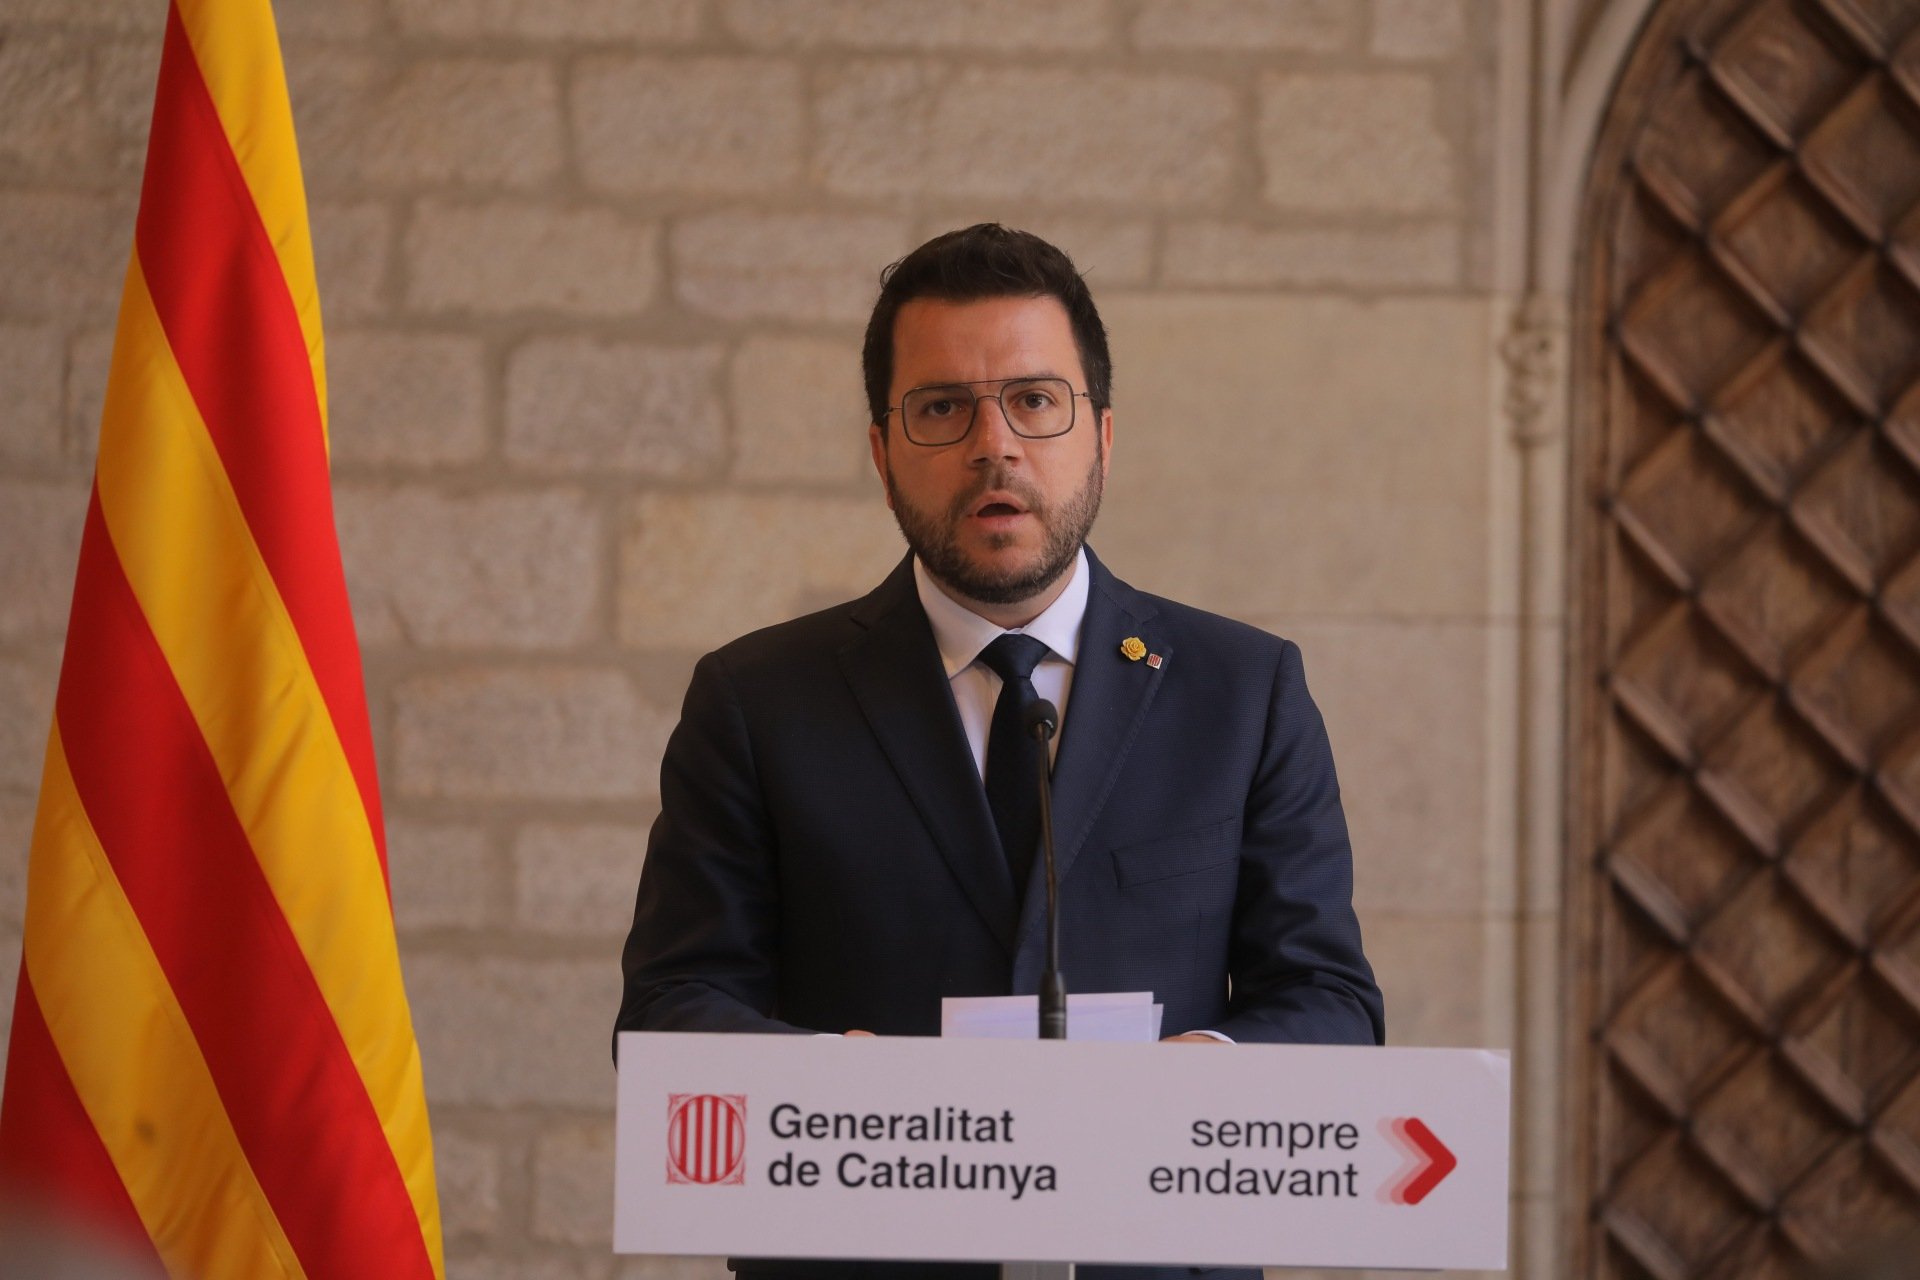 Aragonès calls for a "common front" to defend Catalonia from a PP-Vox government in Spain